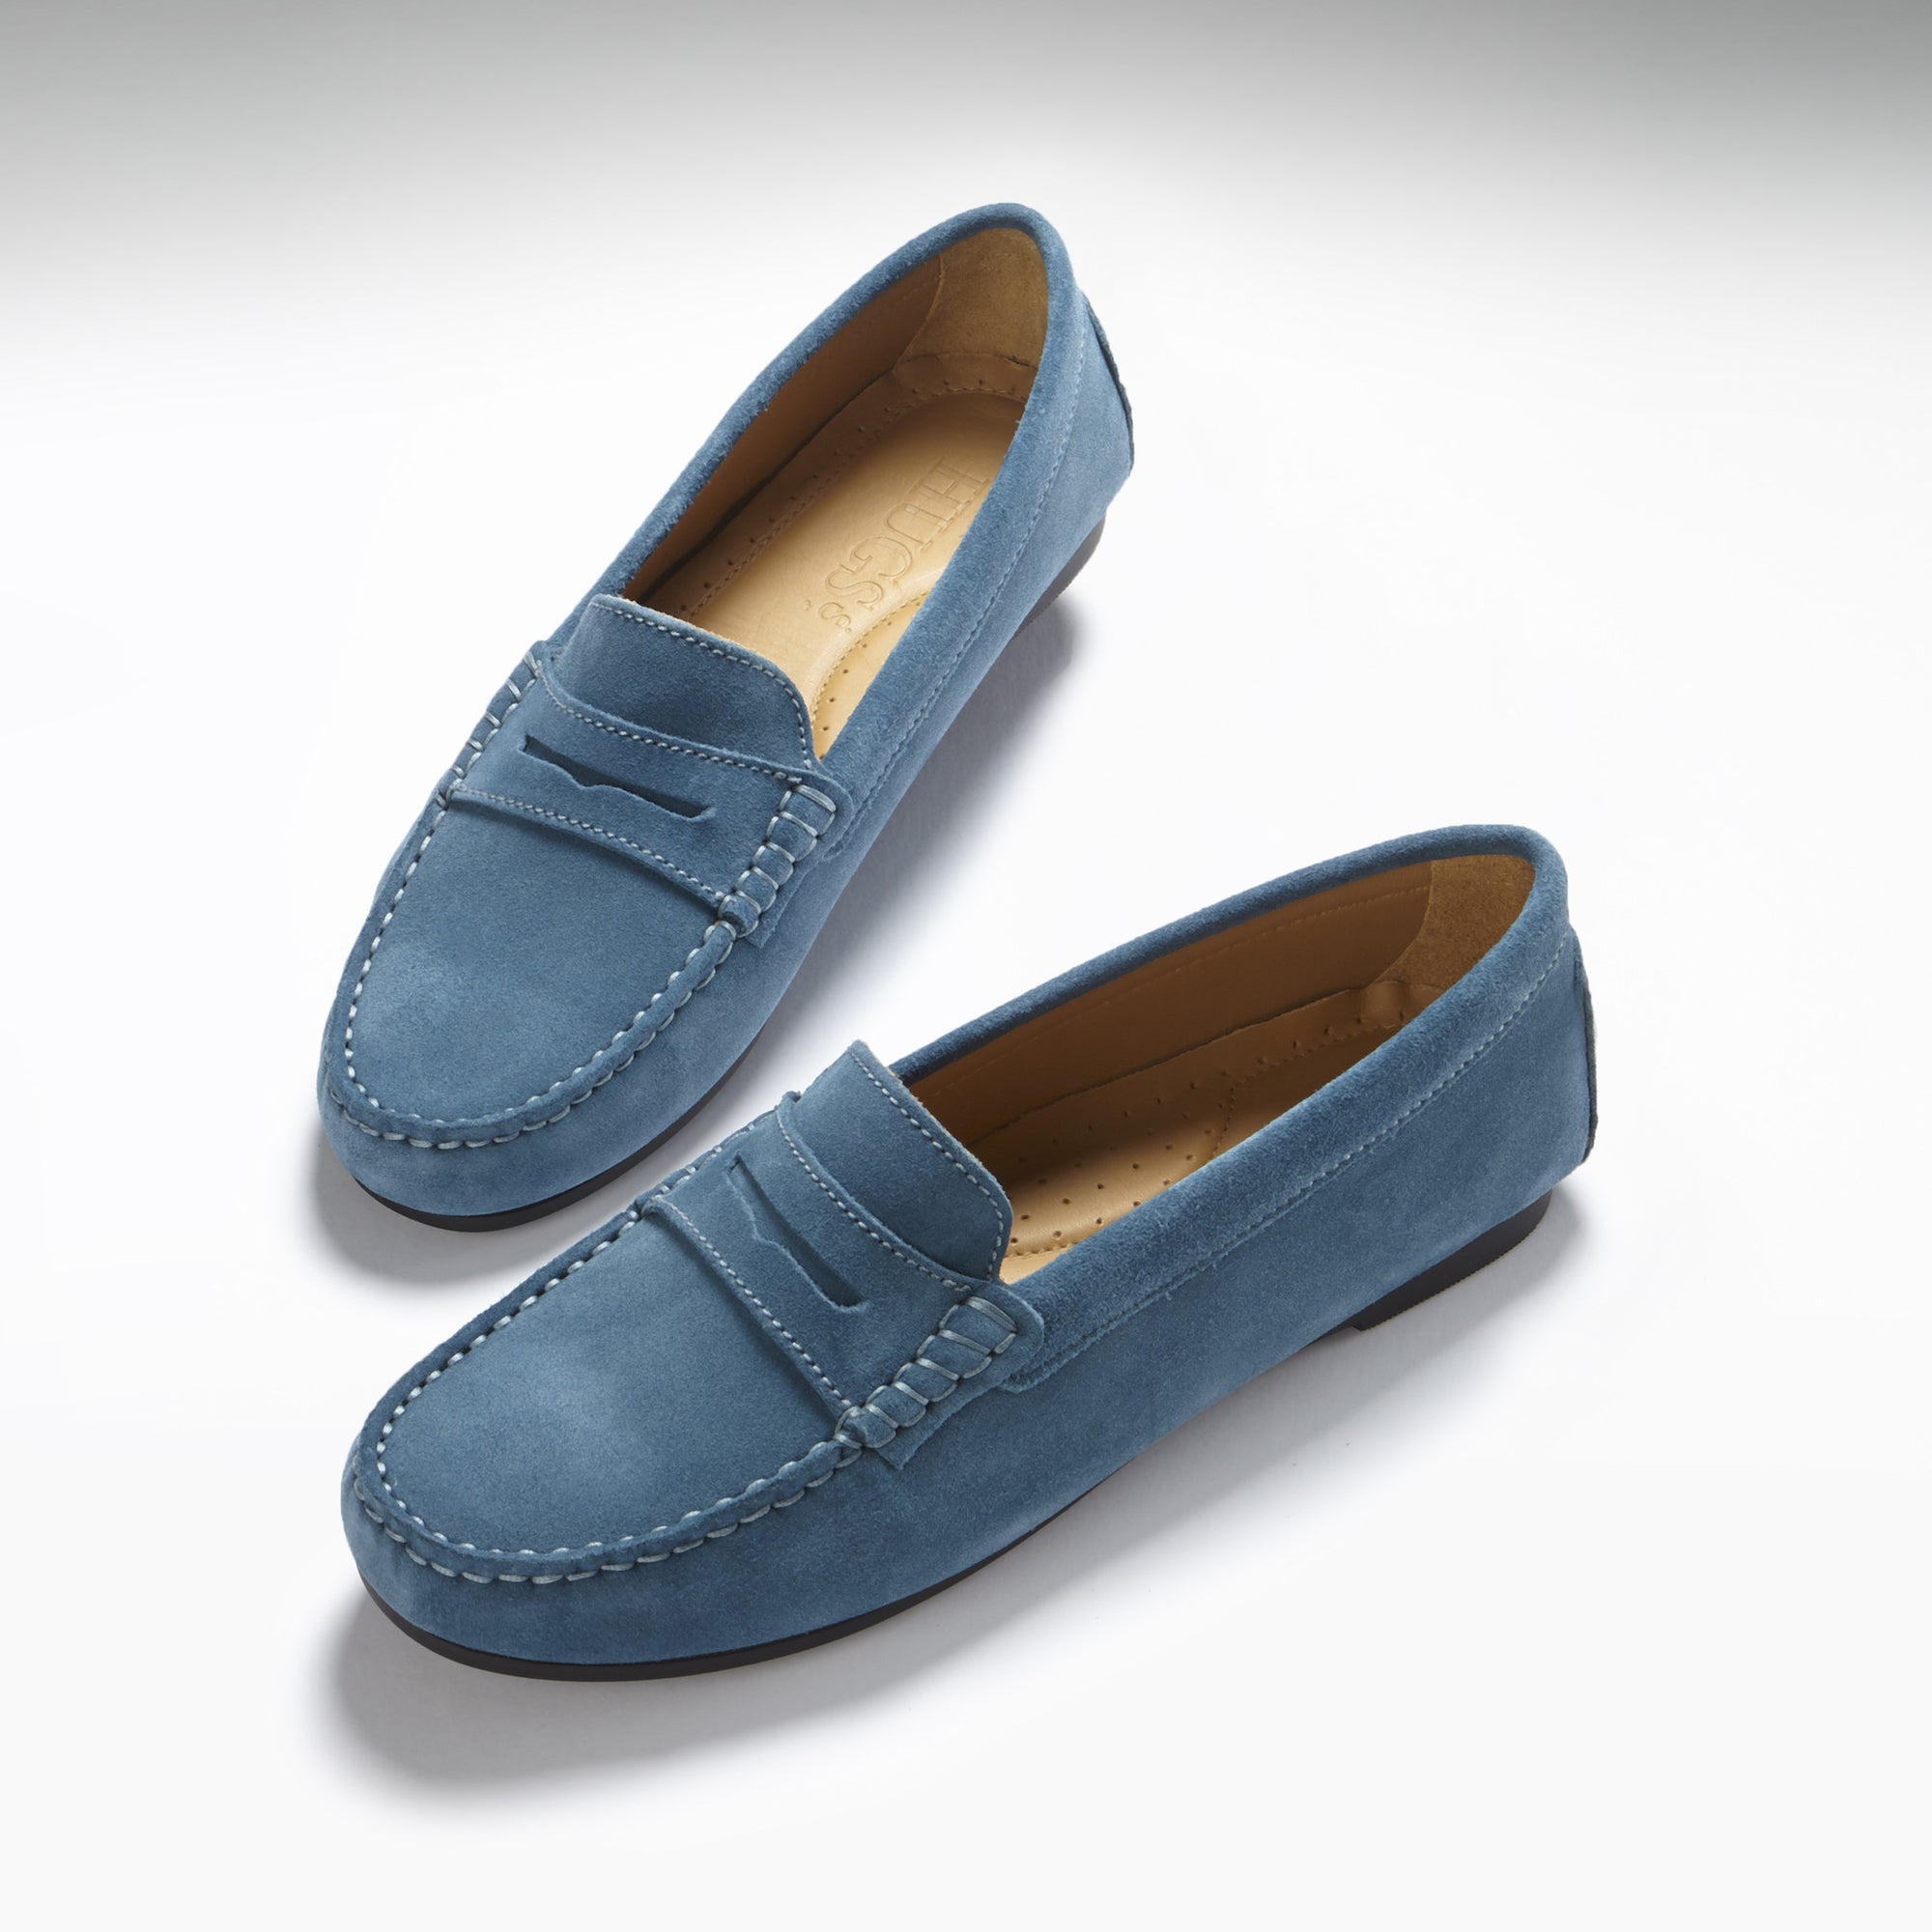 Women's Penny Driving Loafers Full Rubber Sole, teal suede